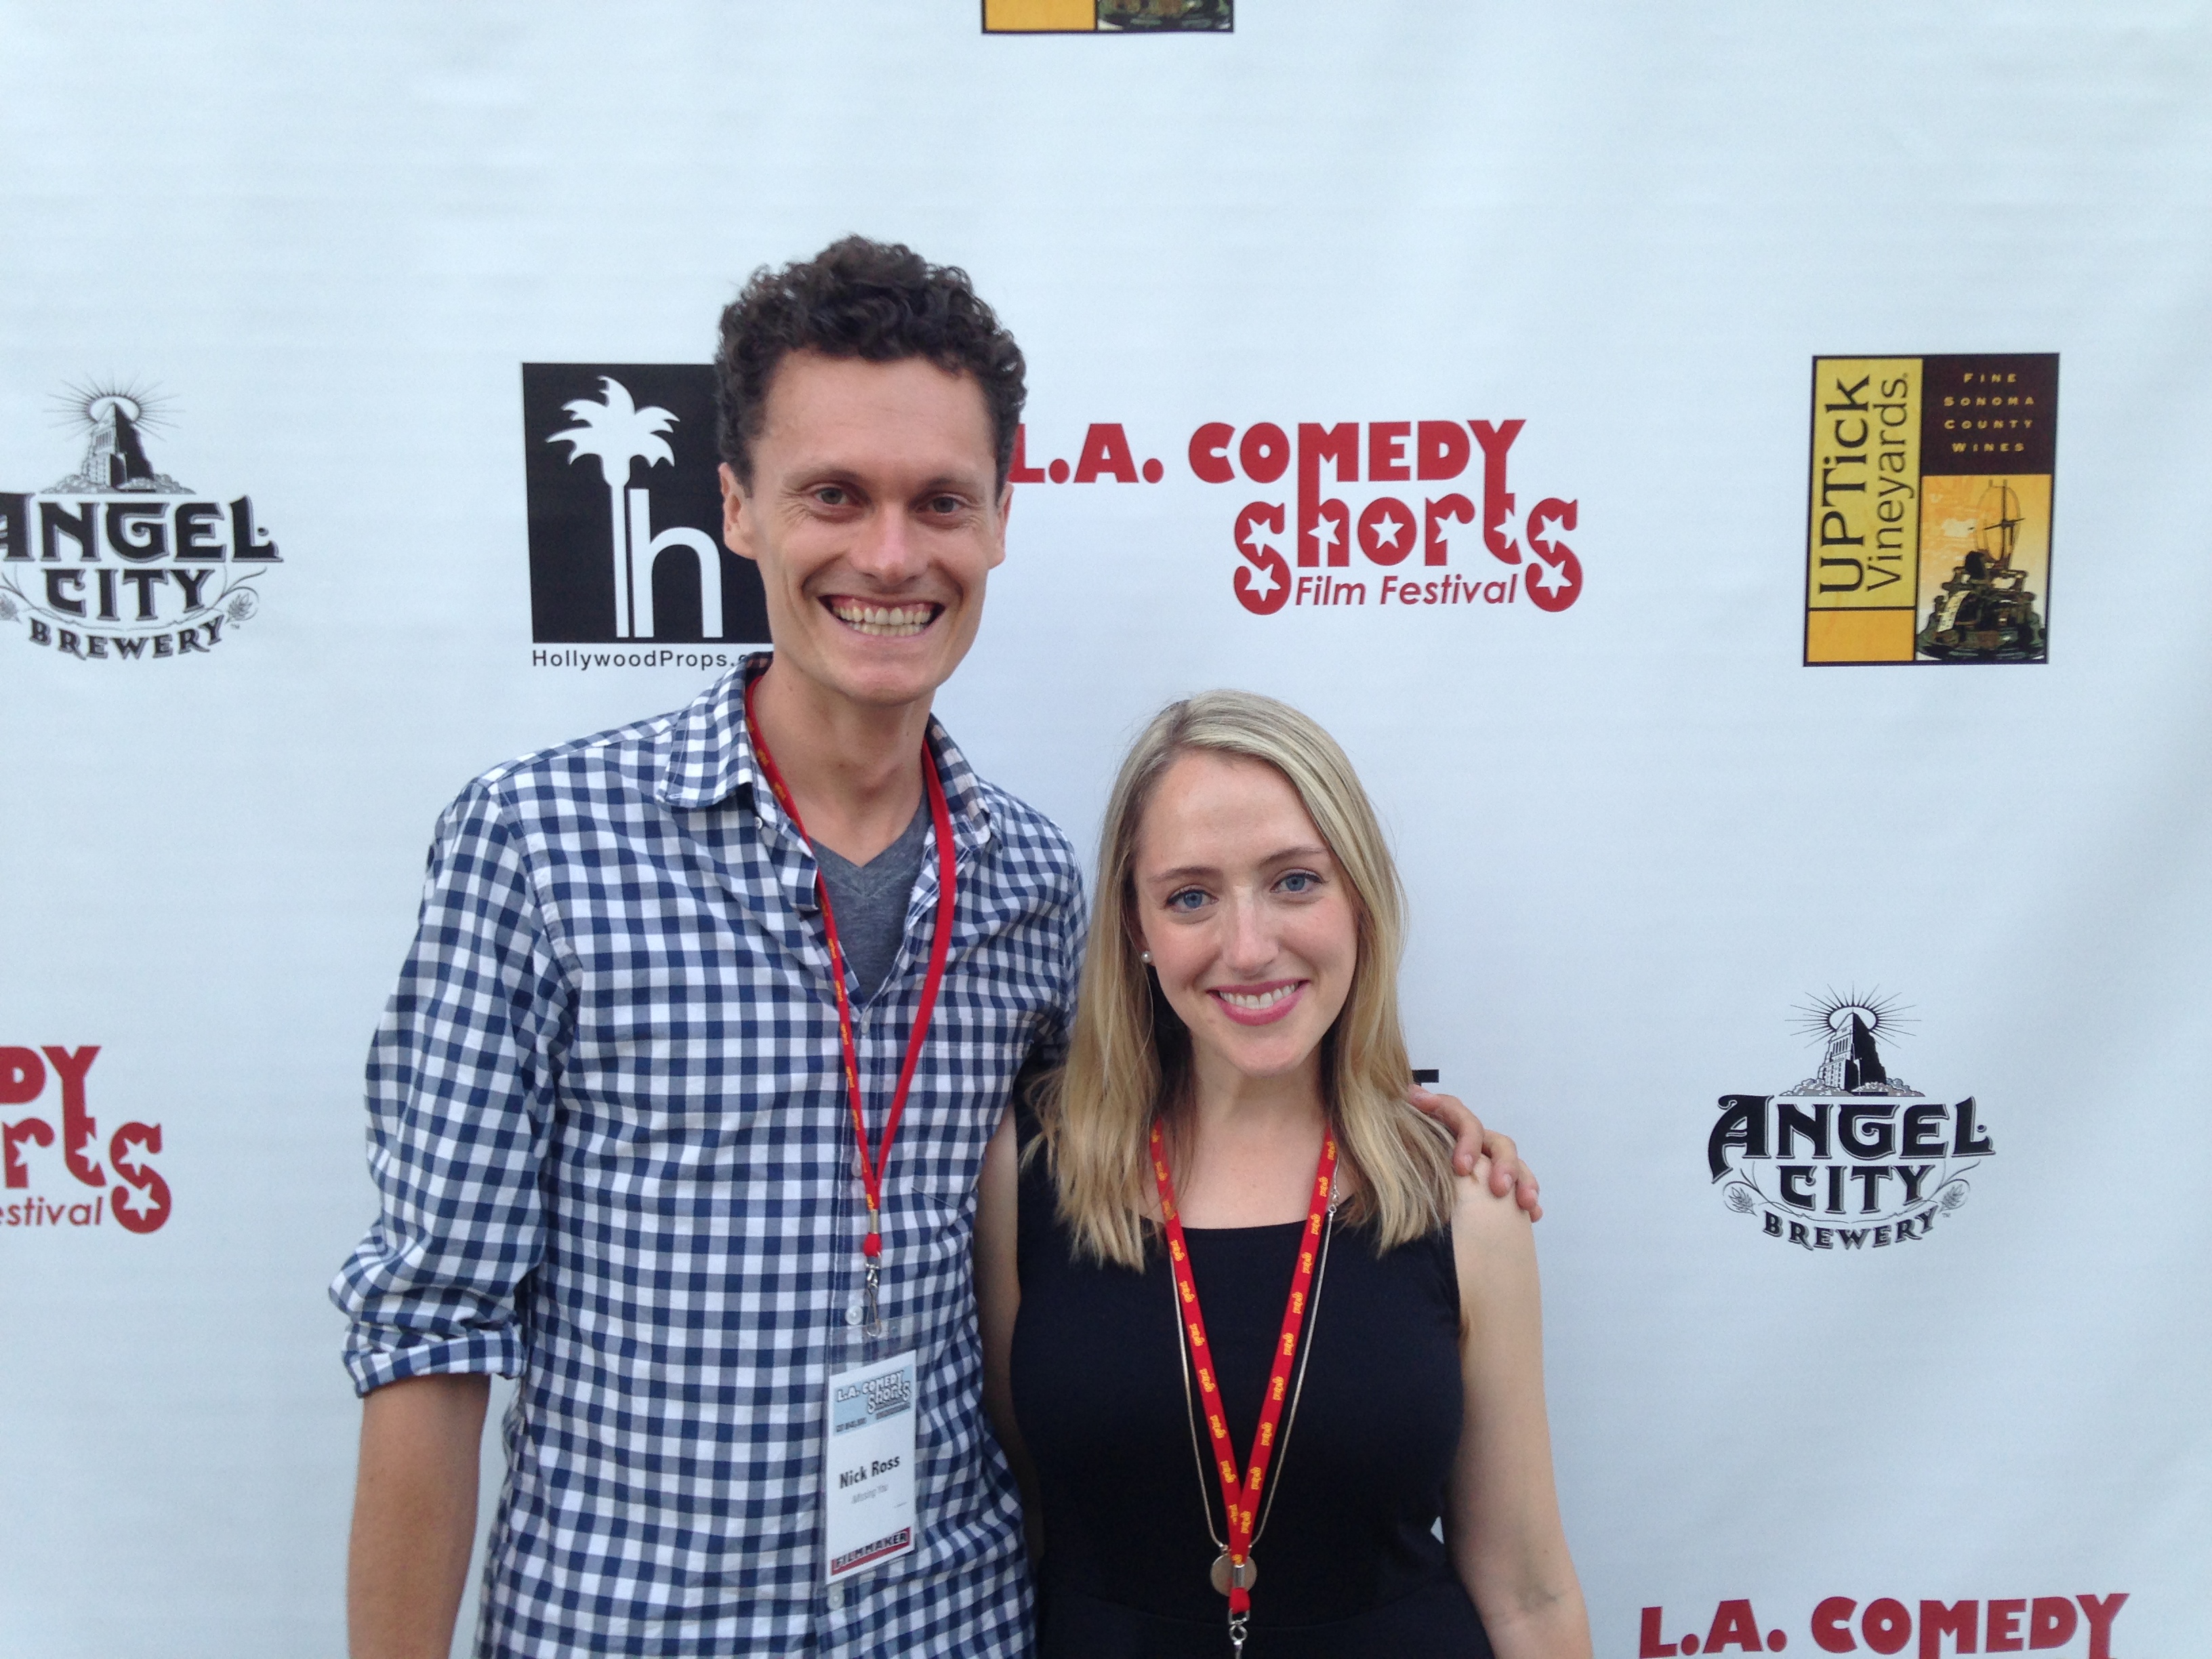 LA Comedy Shorts with Nick Ross for their short Missing You.